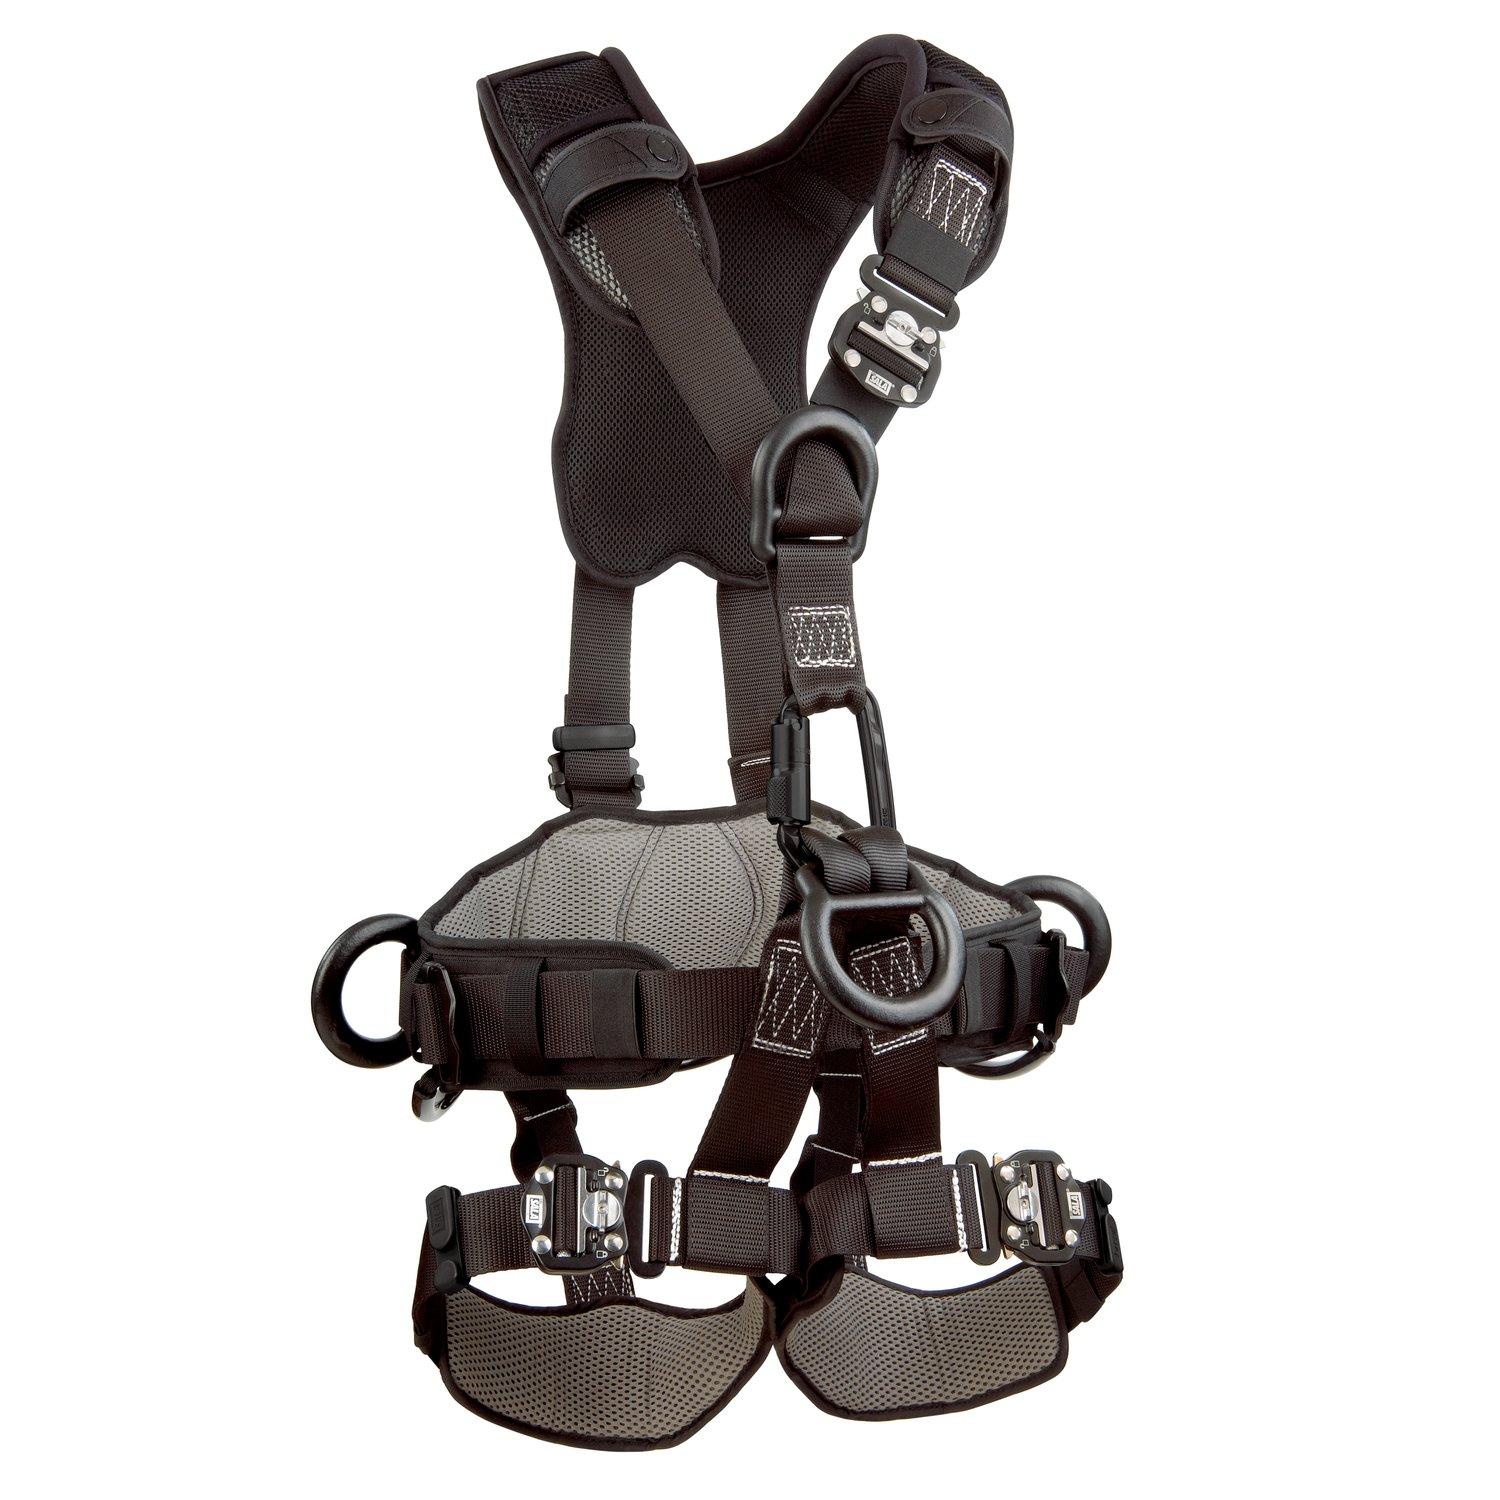 7012816342 - 3M DBI-SALA ExoFit NEX Comfort Rope Access Climbing/Positioning/Rescue/Suspension Safety Harness 1113372, Black, Large